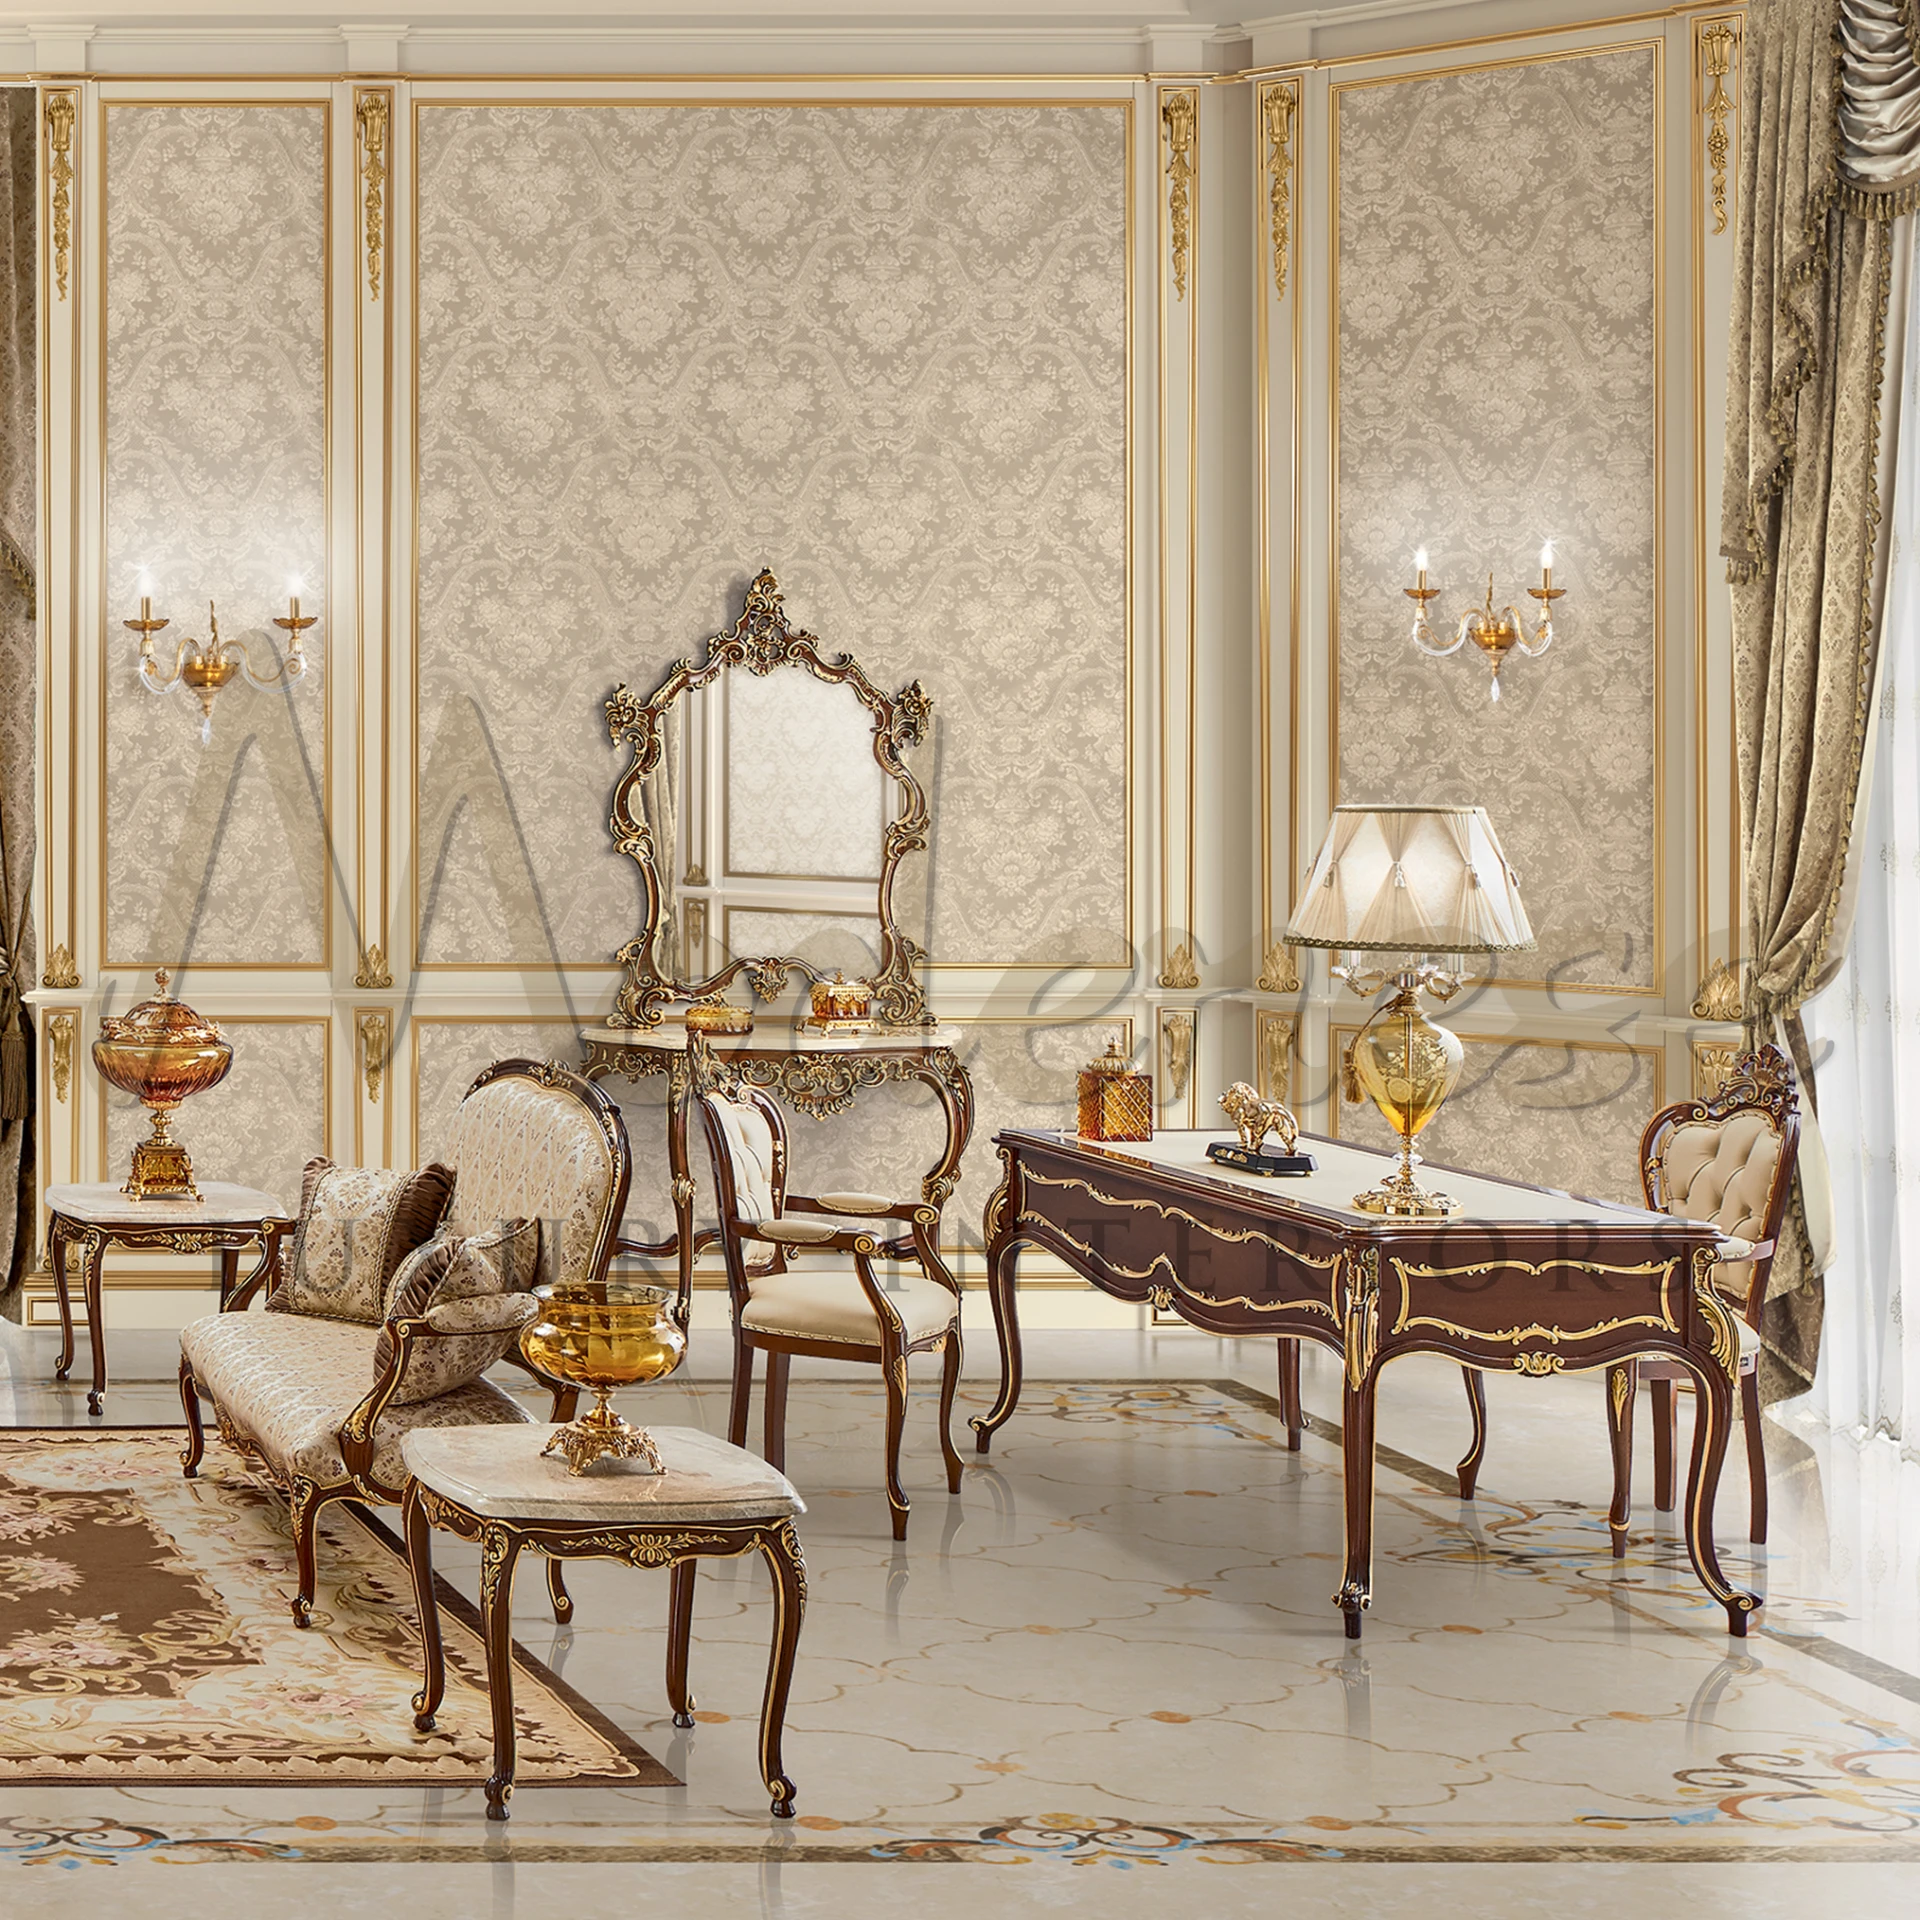 Classic Italian Interior Design showcasing a vintage table, chairs, and decorative items in a grand setting.